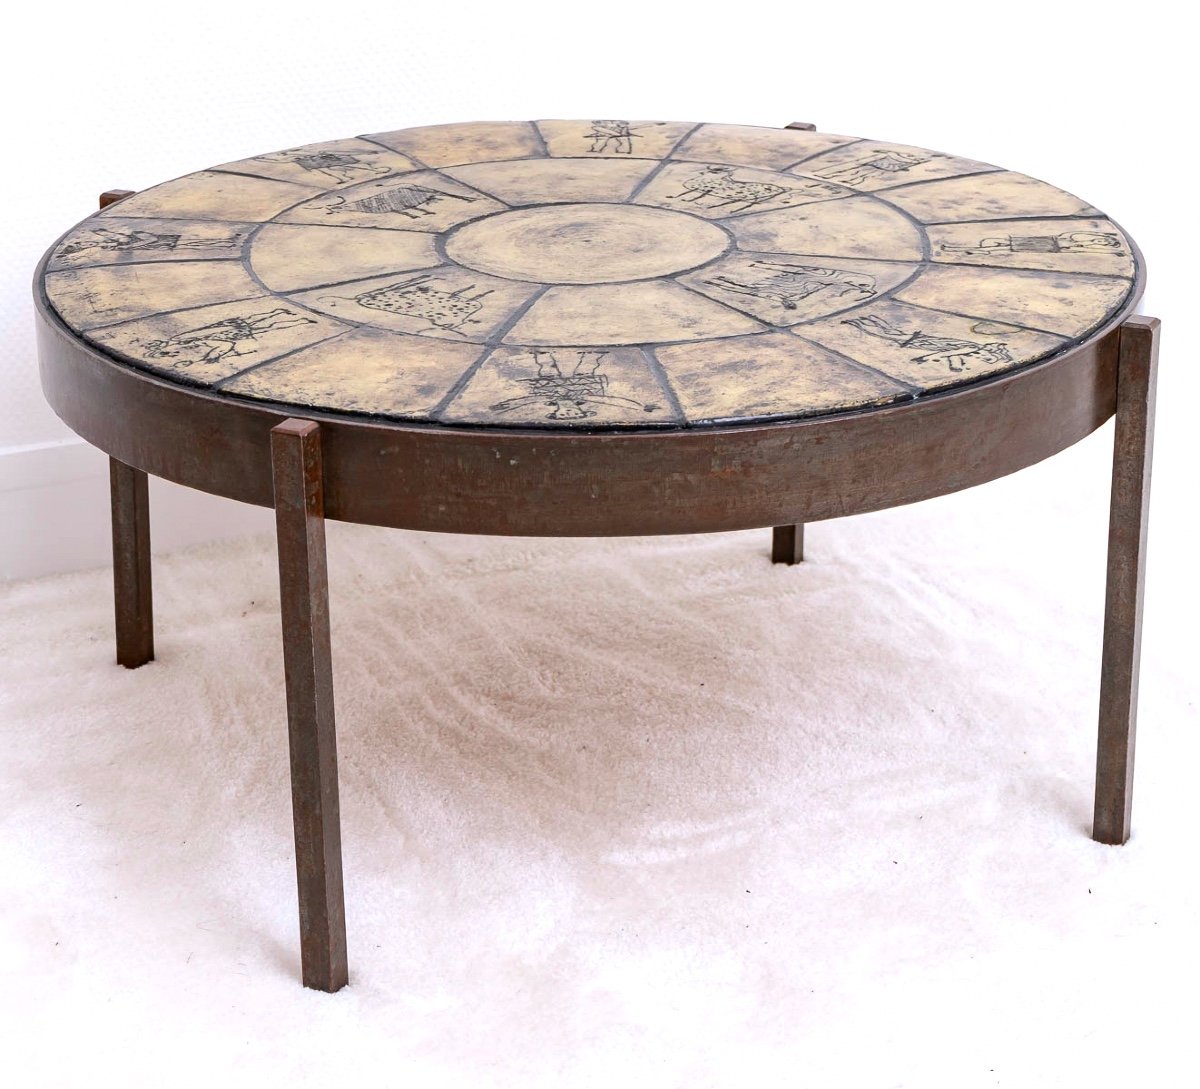 Circular Wrought Iron & Enamelled Ceramic Coffee Table - Jacques Blin - Period: 20th Century